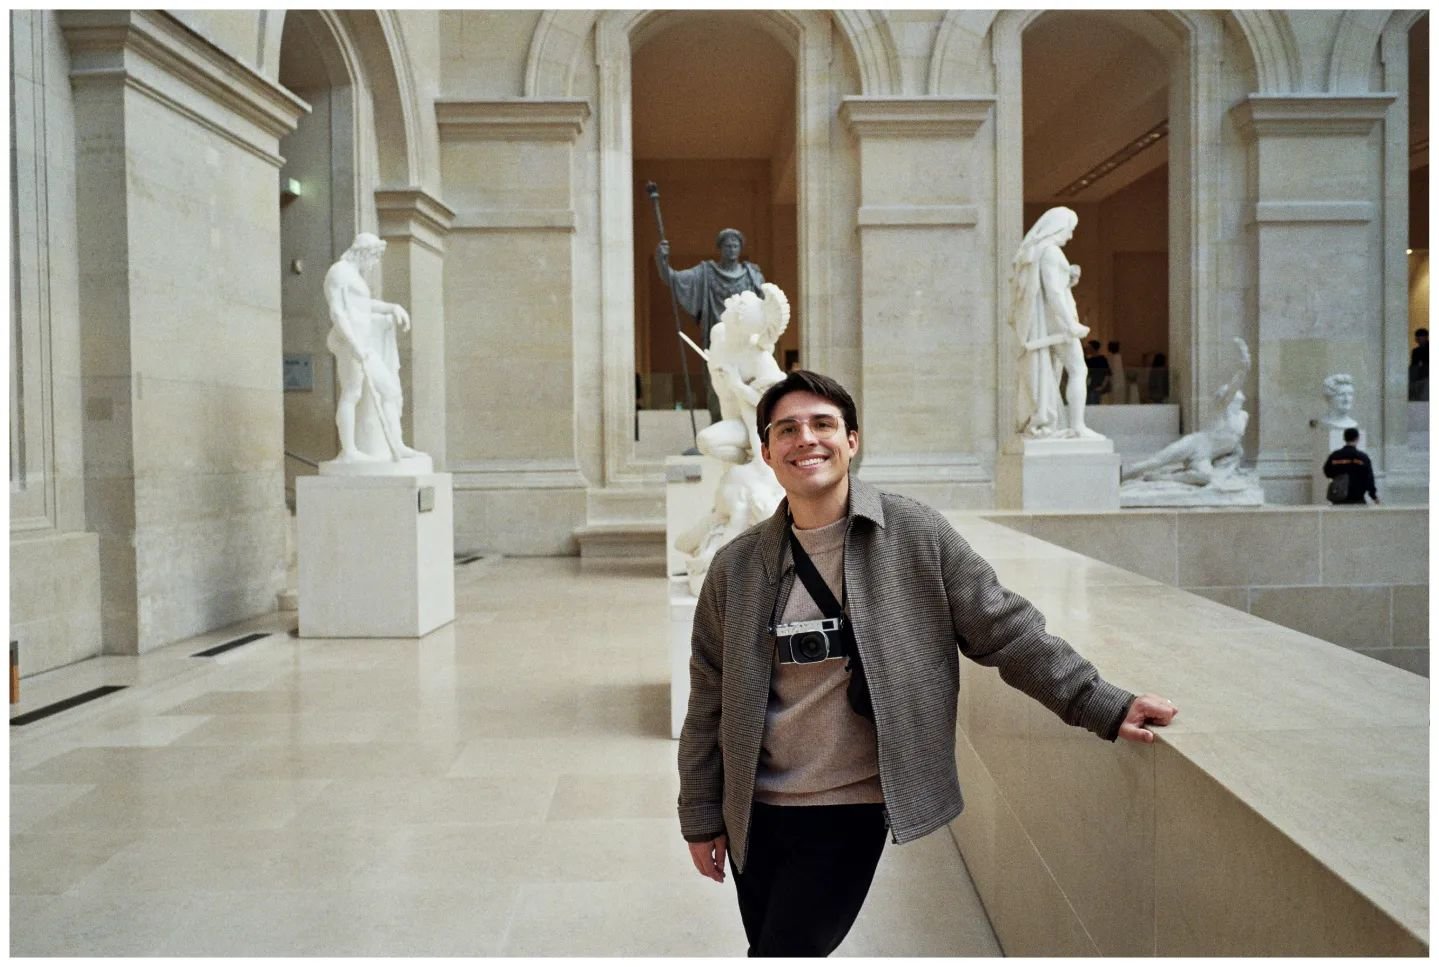 Paris looks great on me

Actually, travelling is my best outfit.

3 #film frames from our european adventure. Shot on a #fujfilm #fujifilmklassew 

I've been severely behind on posting, editing, and even taking photos lately. Thanks for sticking with